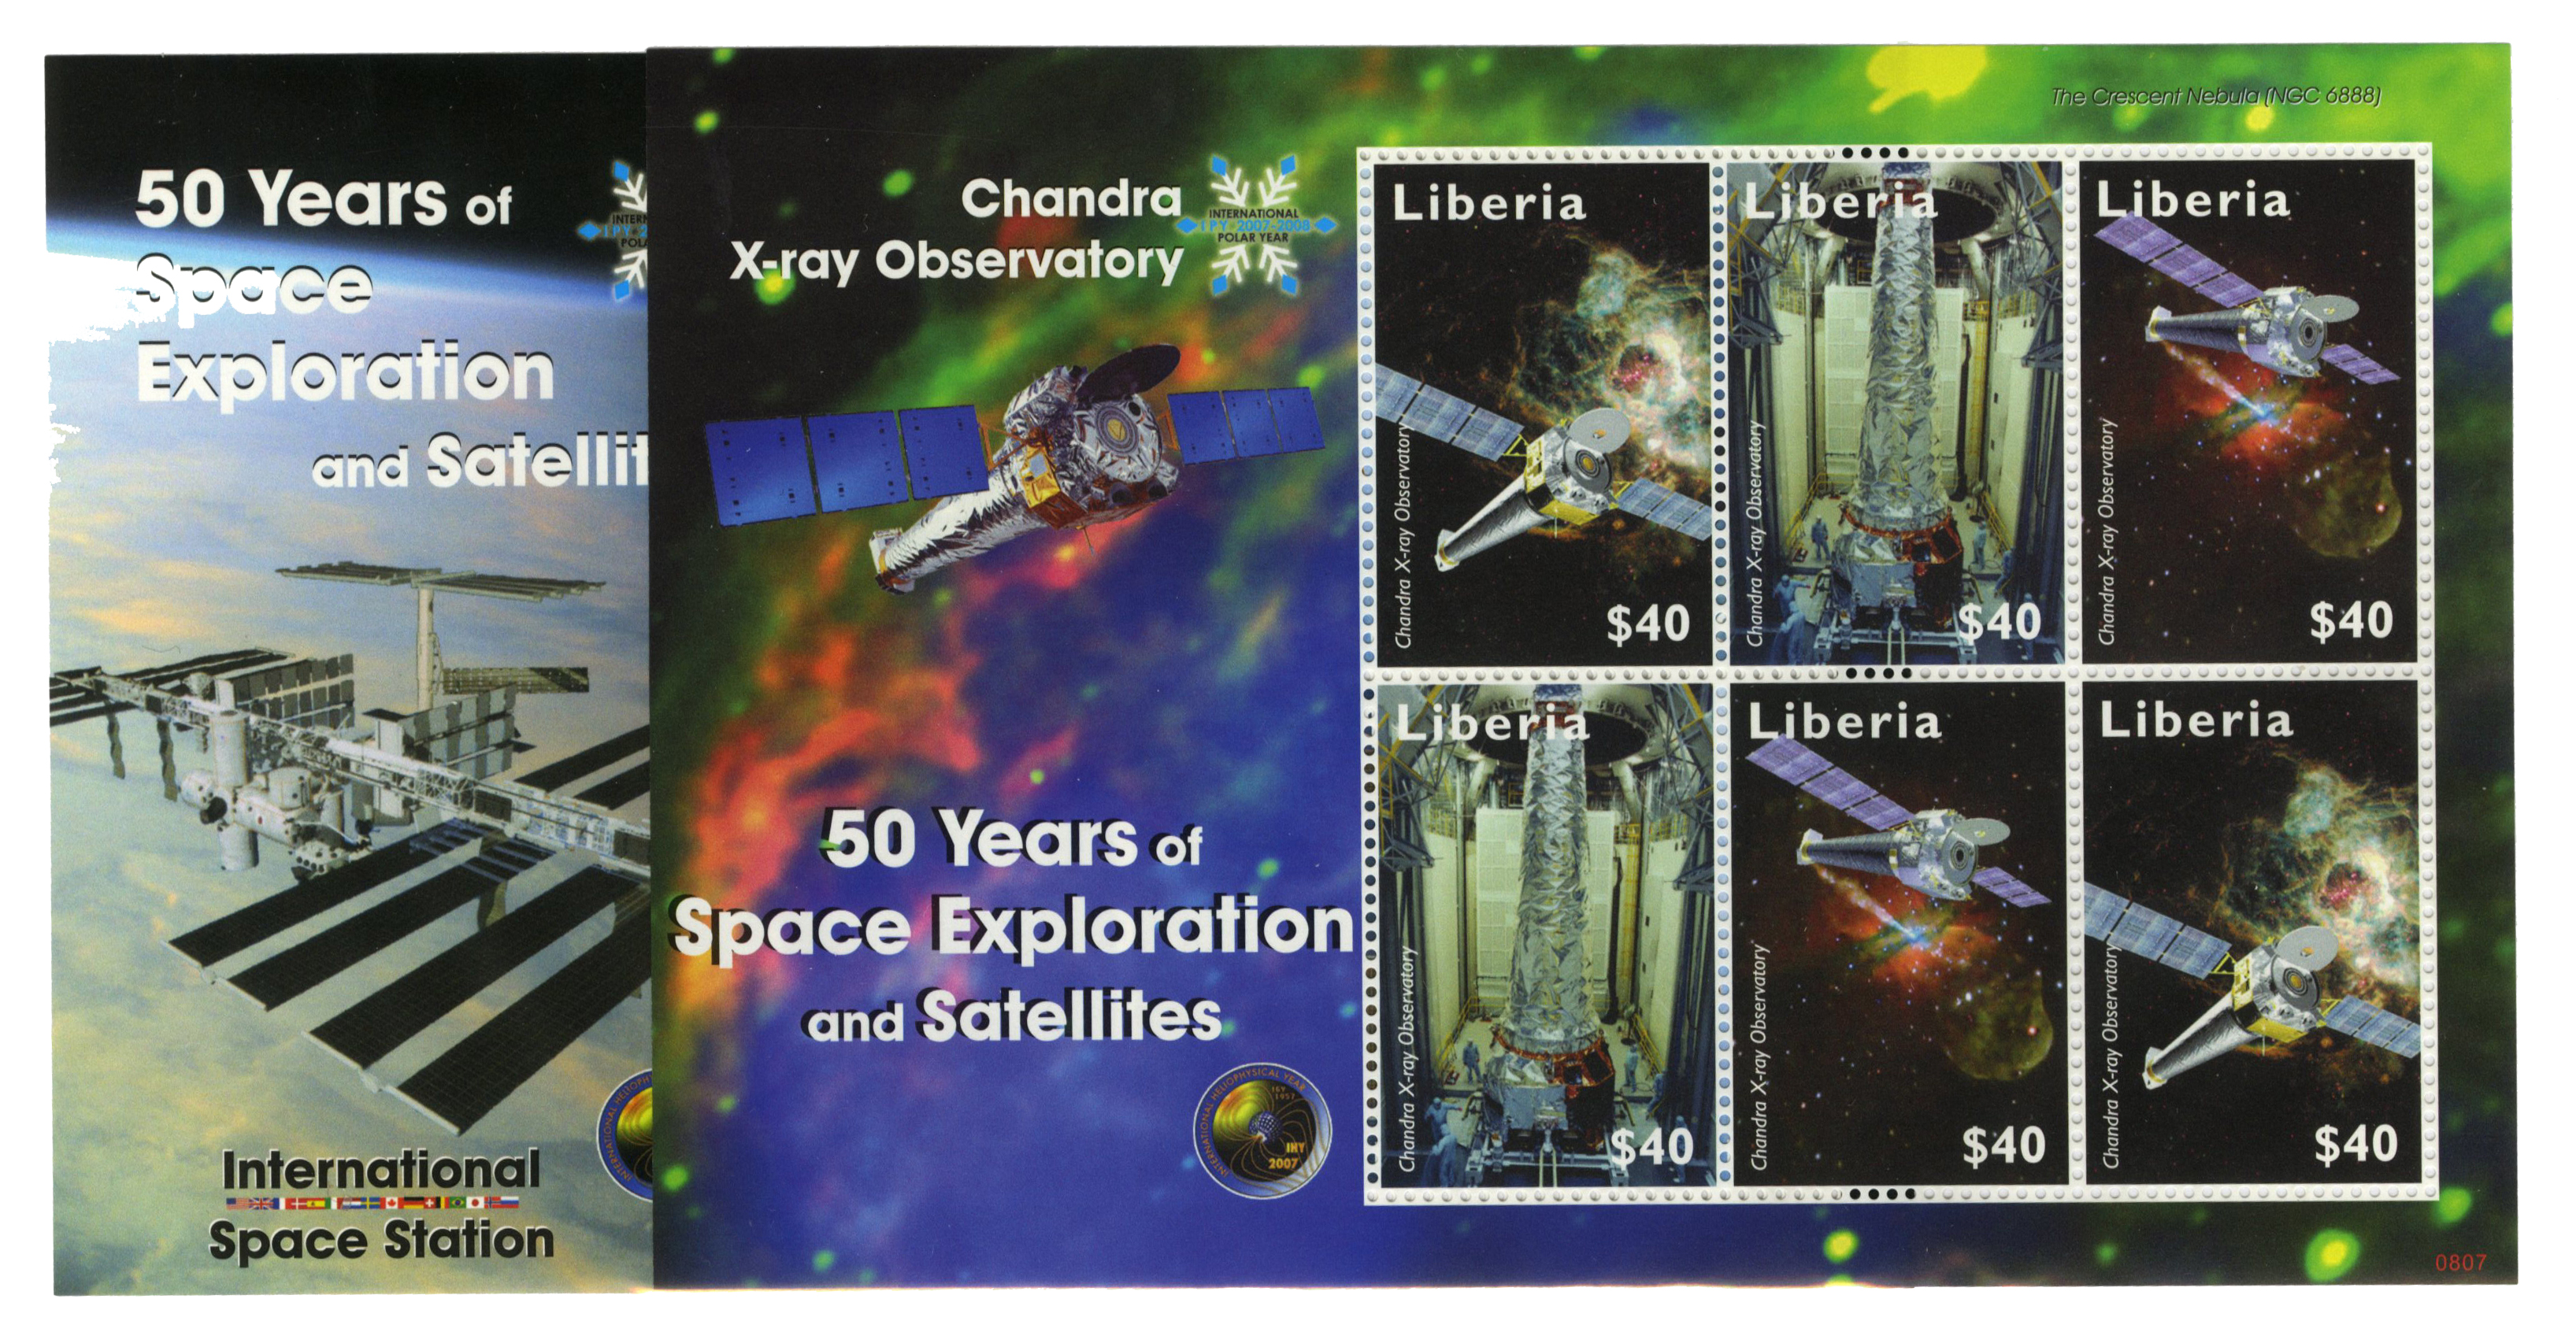 2008 Liberia 50 Years of Space Exploration stamp sheets